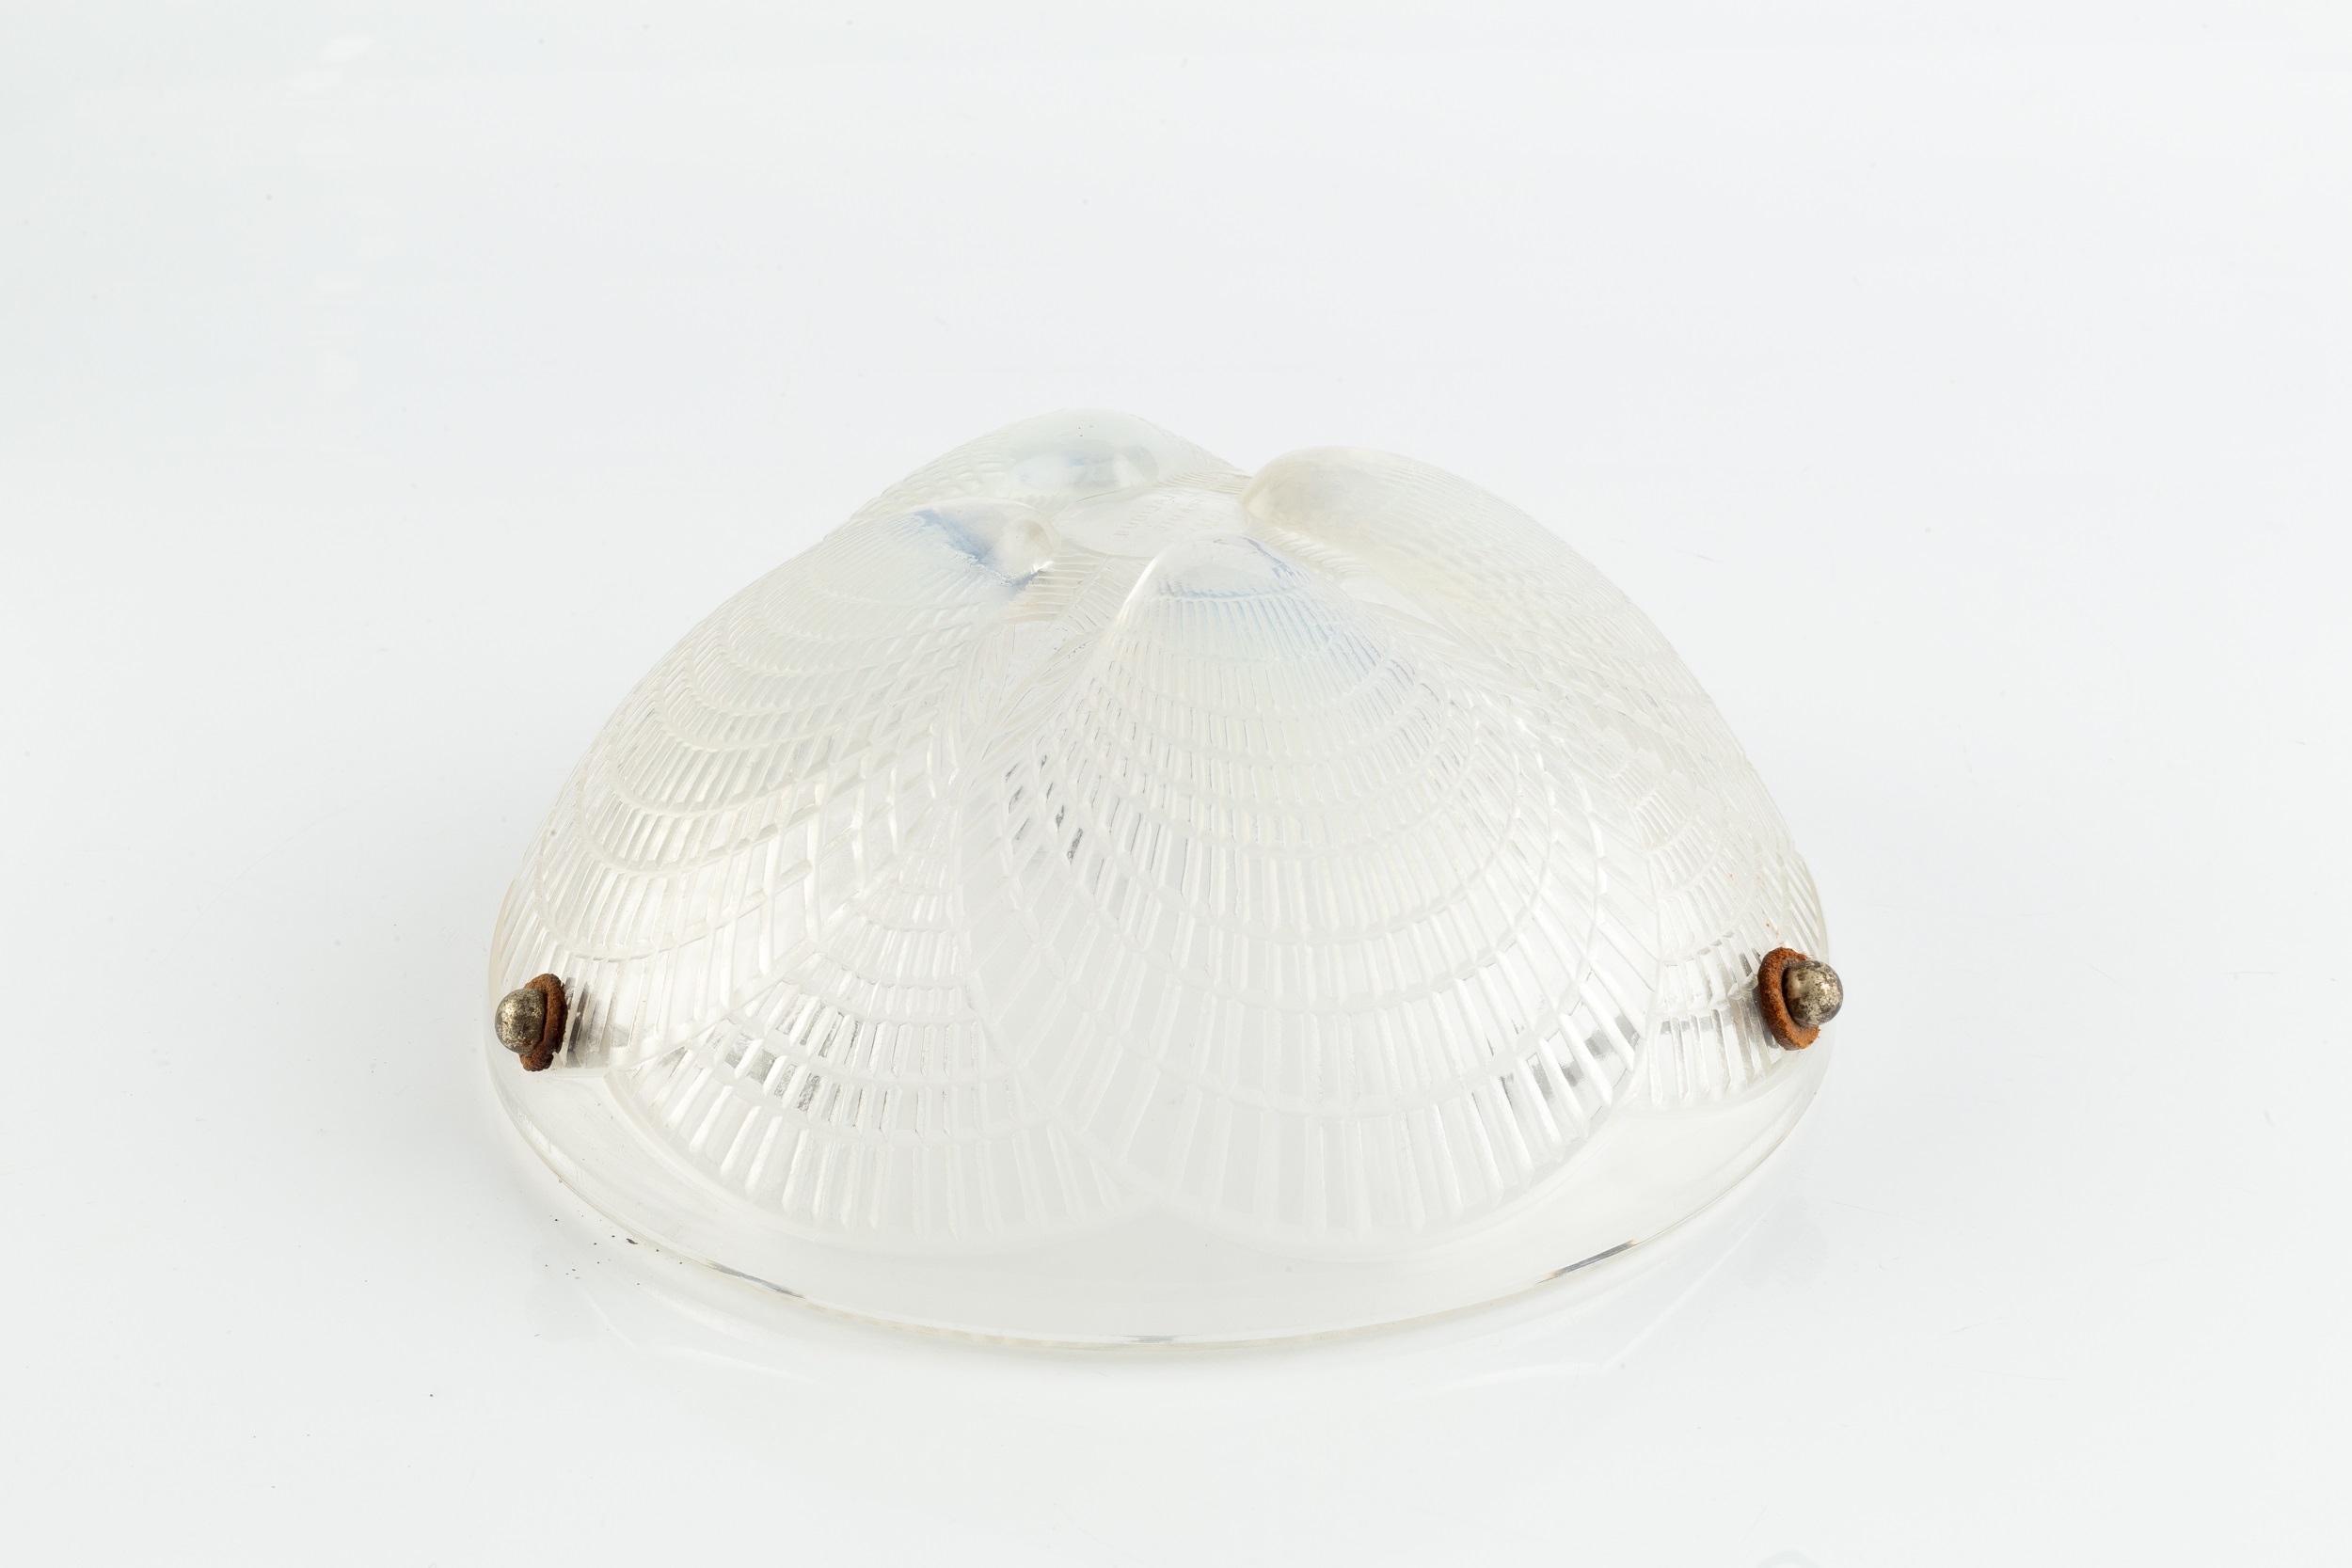 René Lalique (French 1860-1945) Coquilles plafonnier, designed 1925 glass, etched 'R Lalique France' - Image 2 of 3